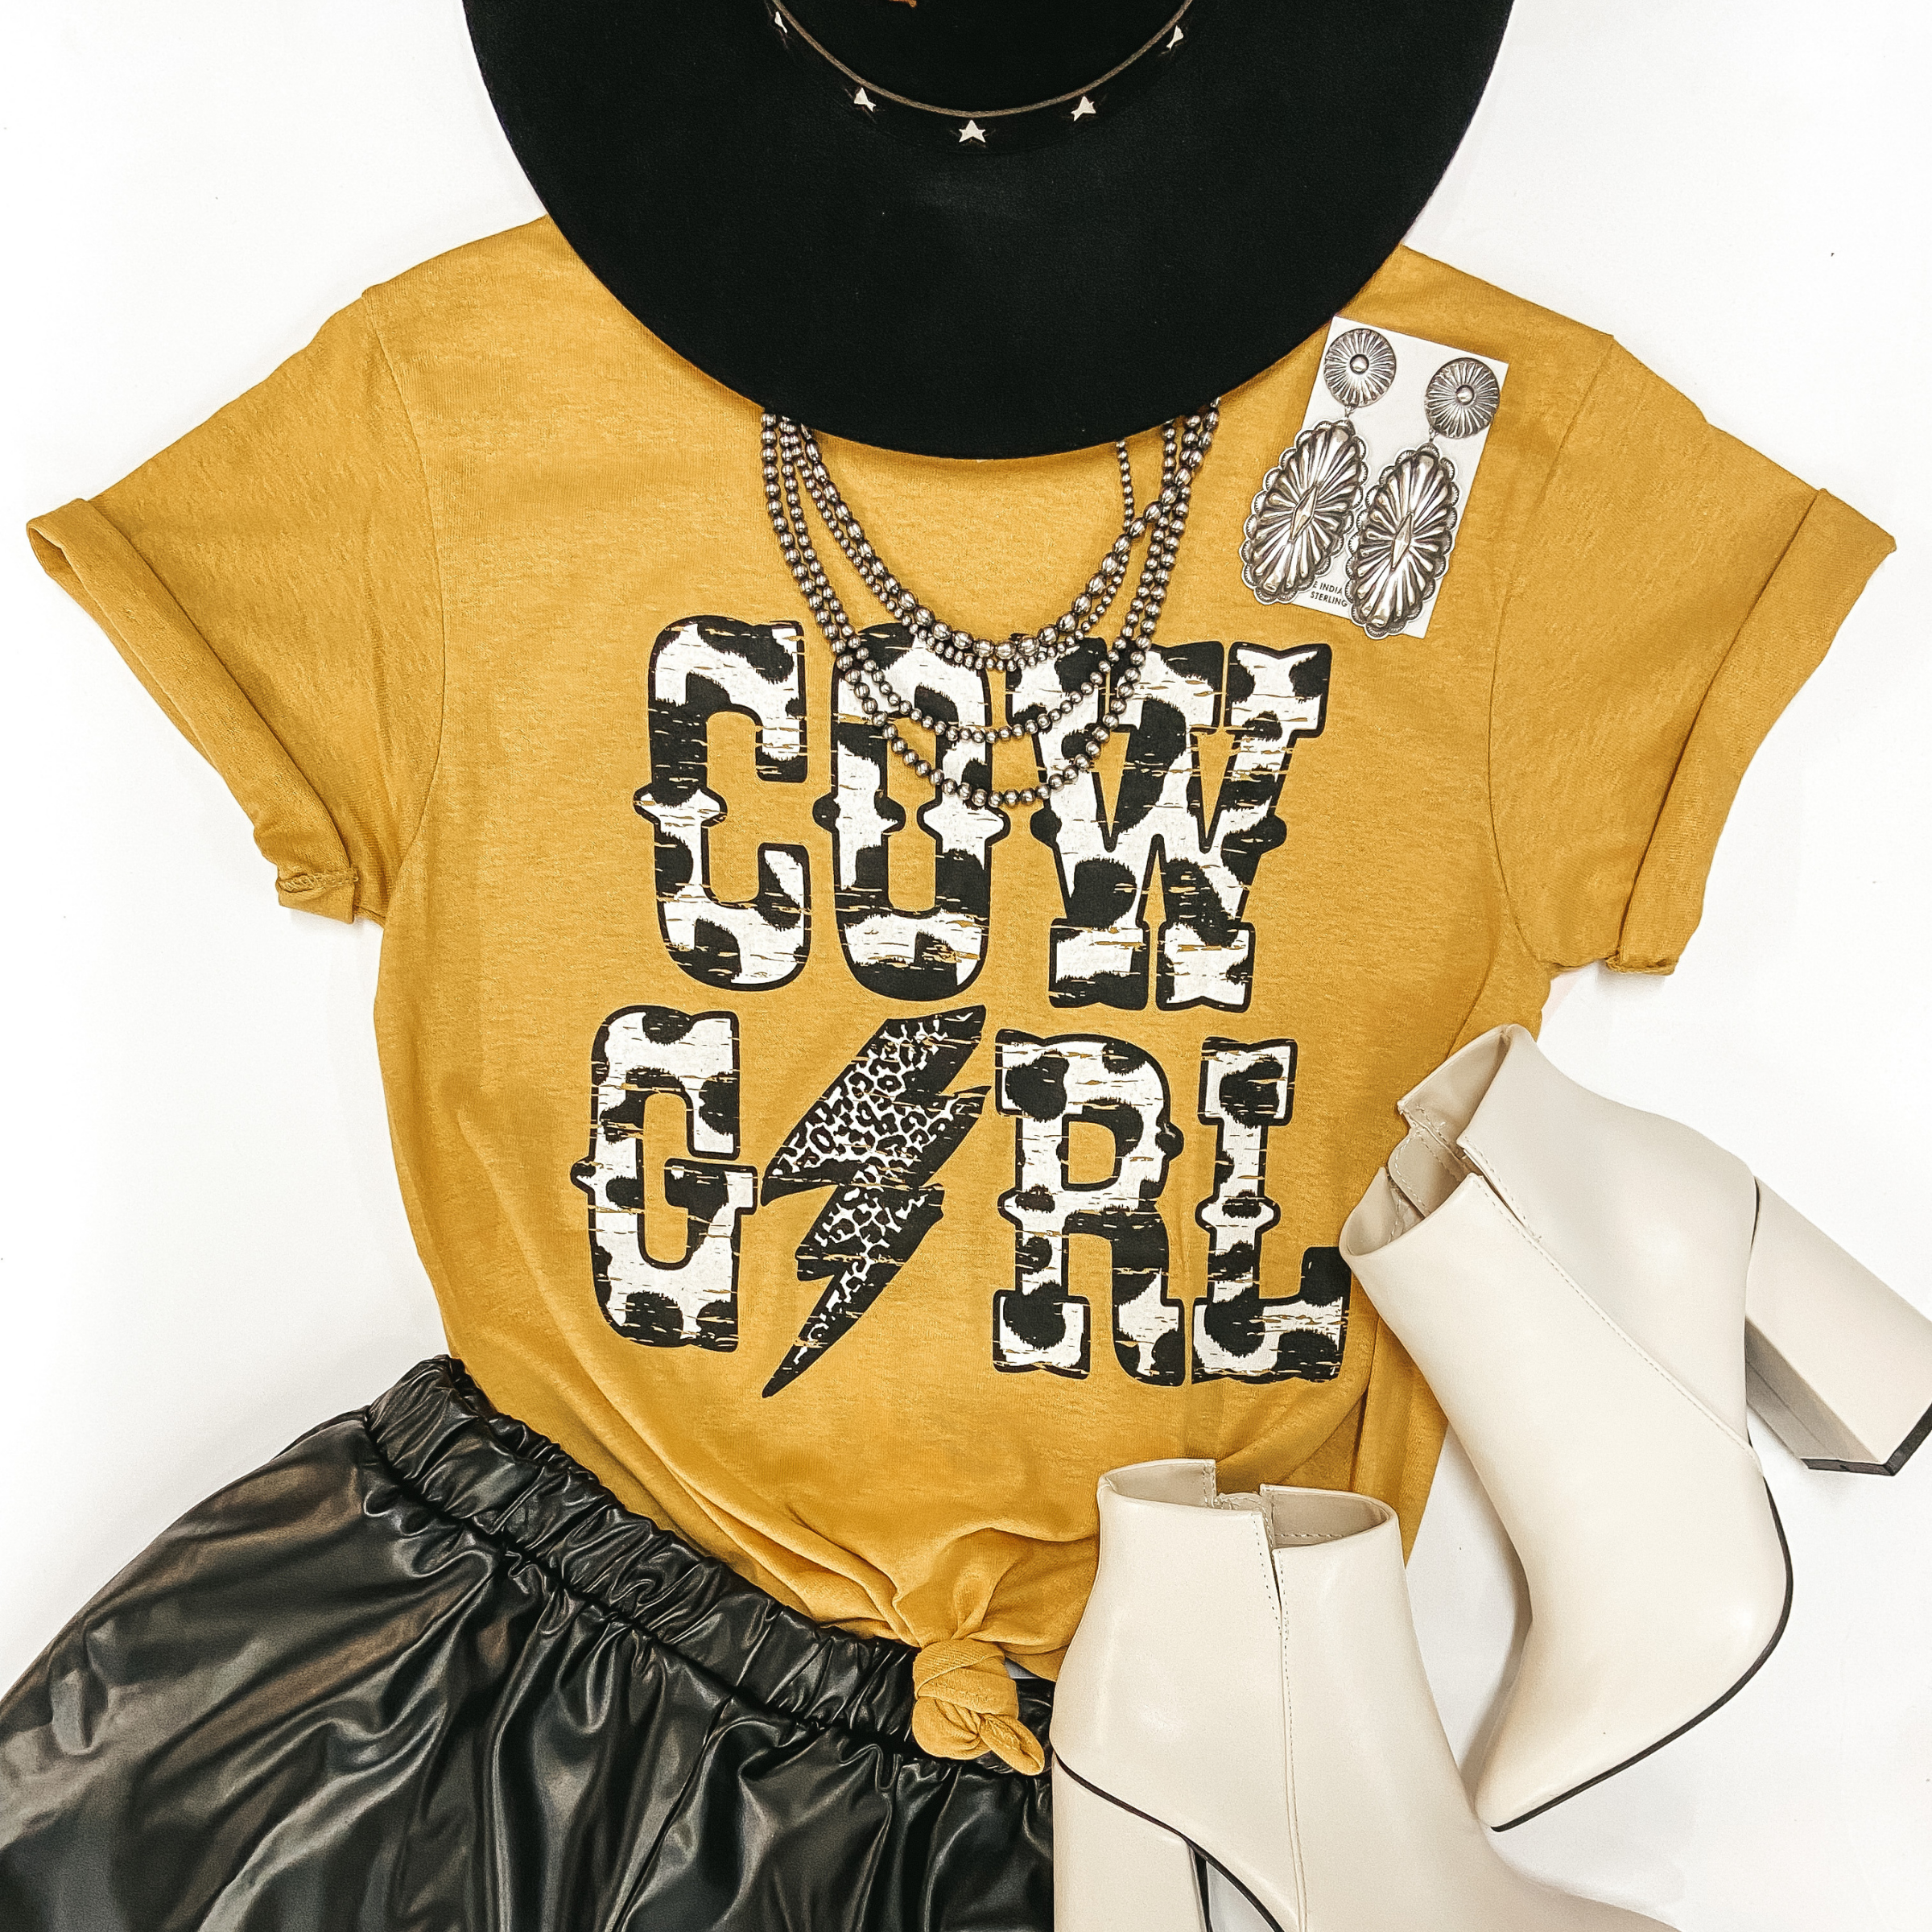 A mustard yellow graphic tee with cuffed sleeves and a knotted front. The tee shirt has a graphic that says "Cow Girl" in cow print with a leopard print lightning bolt in place of the "i" in "girl." Pictured on white background with black hat, black faux leather shorts, ivory booties, and sterling silver jewelry.